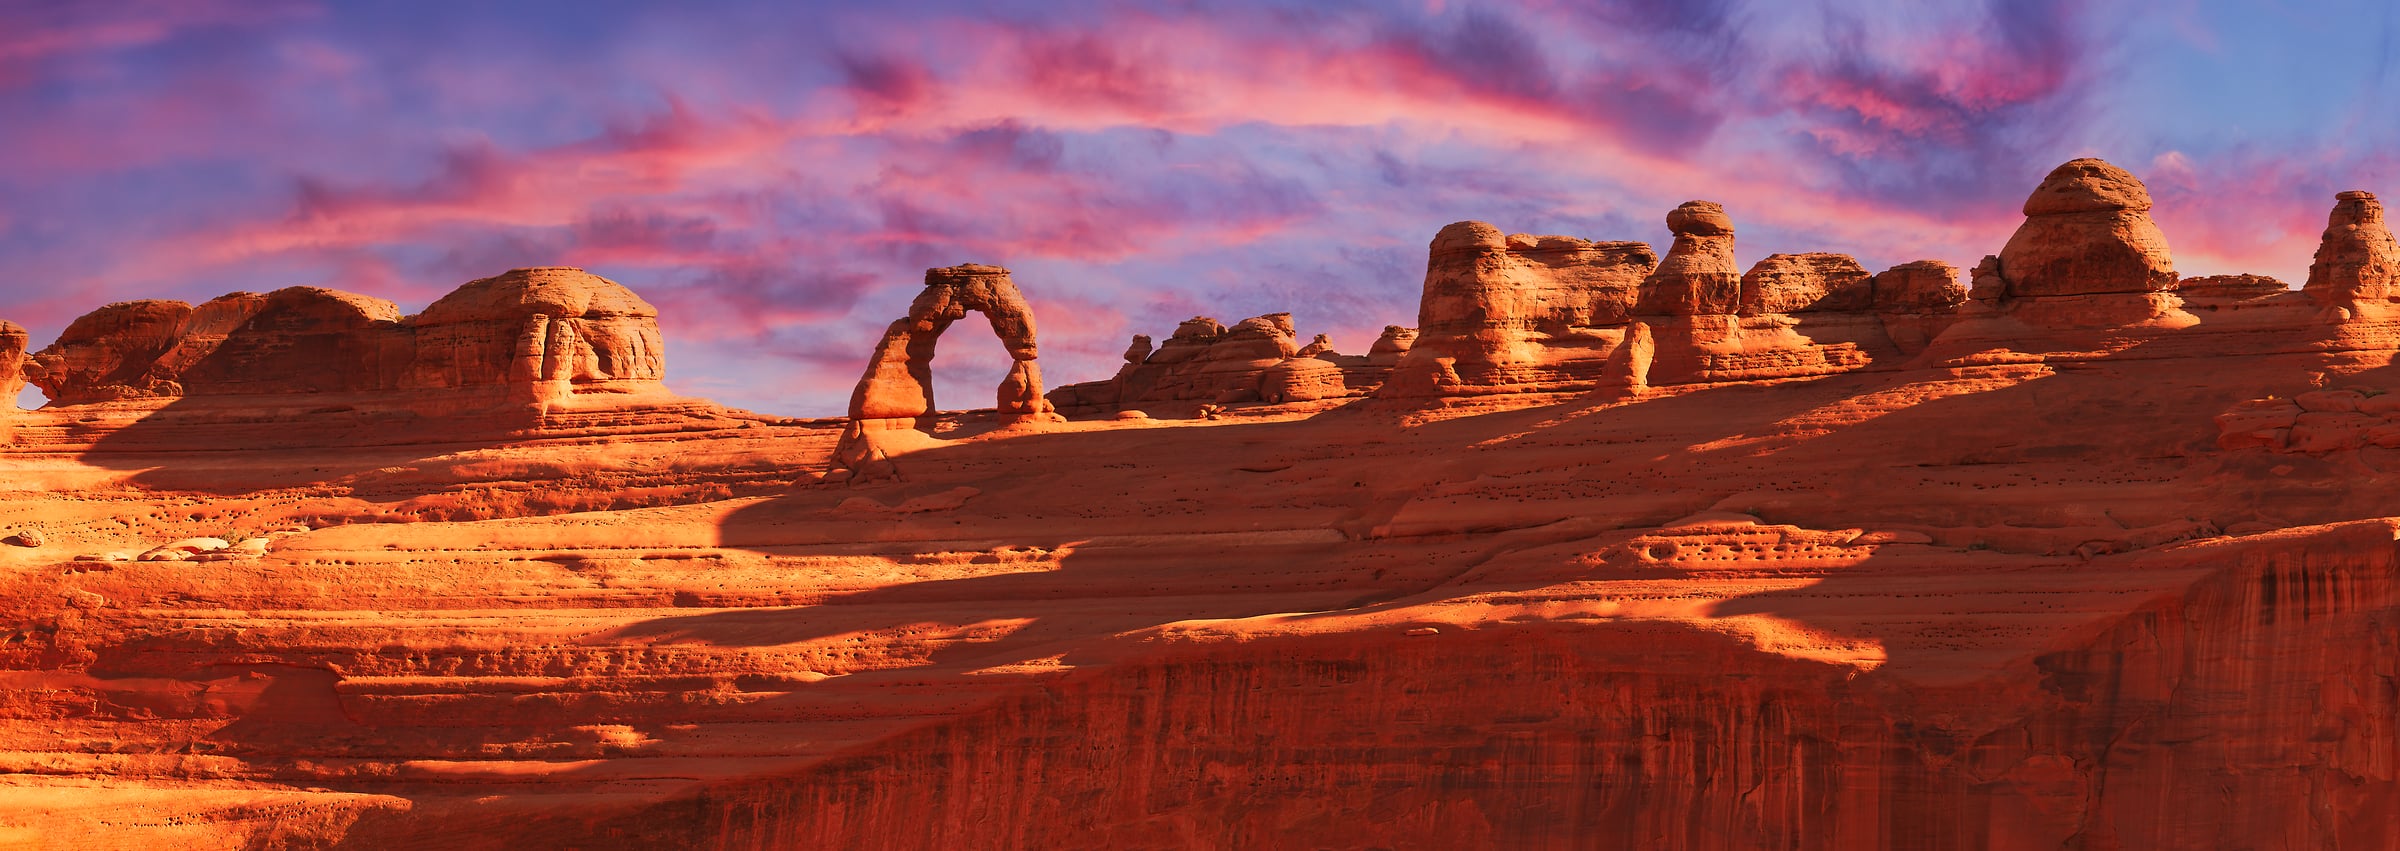 276 megapixels! A very high resolution, large-format VAST photo print of Delicate Arch in Arches National Park at sunset; landscape photograph created by David David in Utah